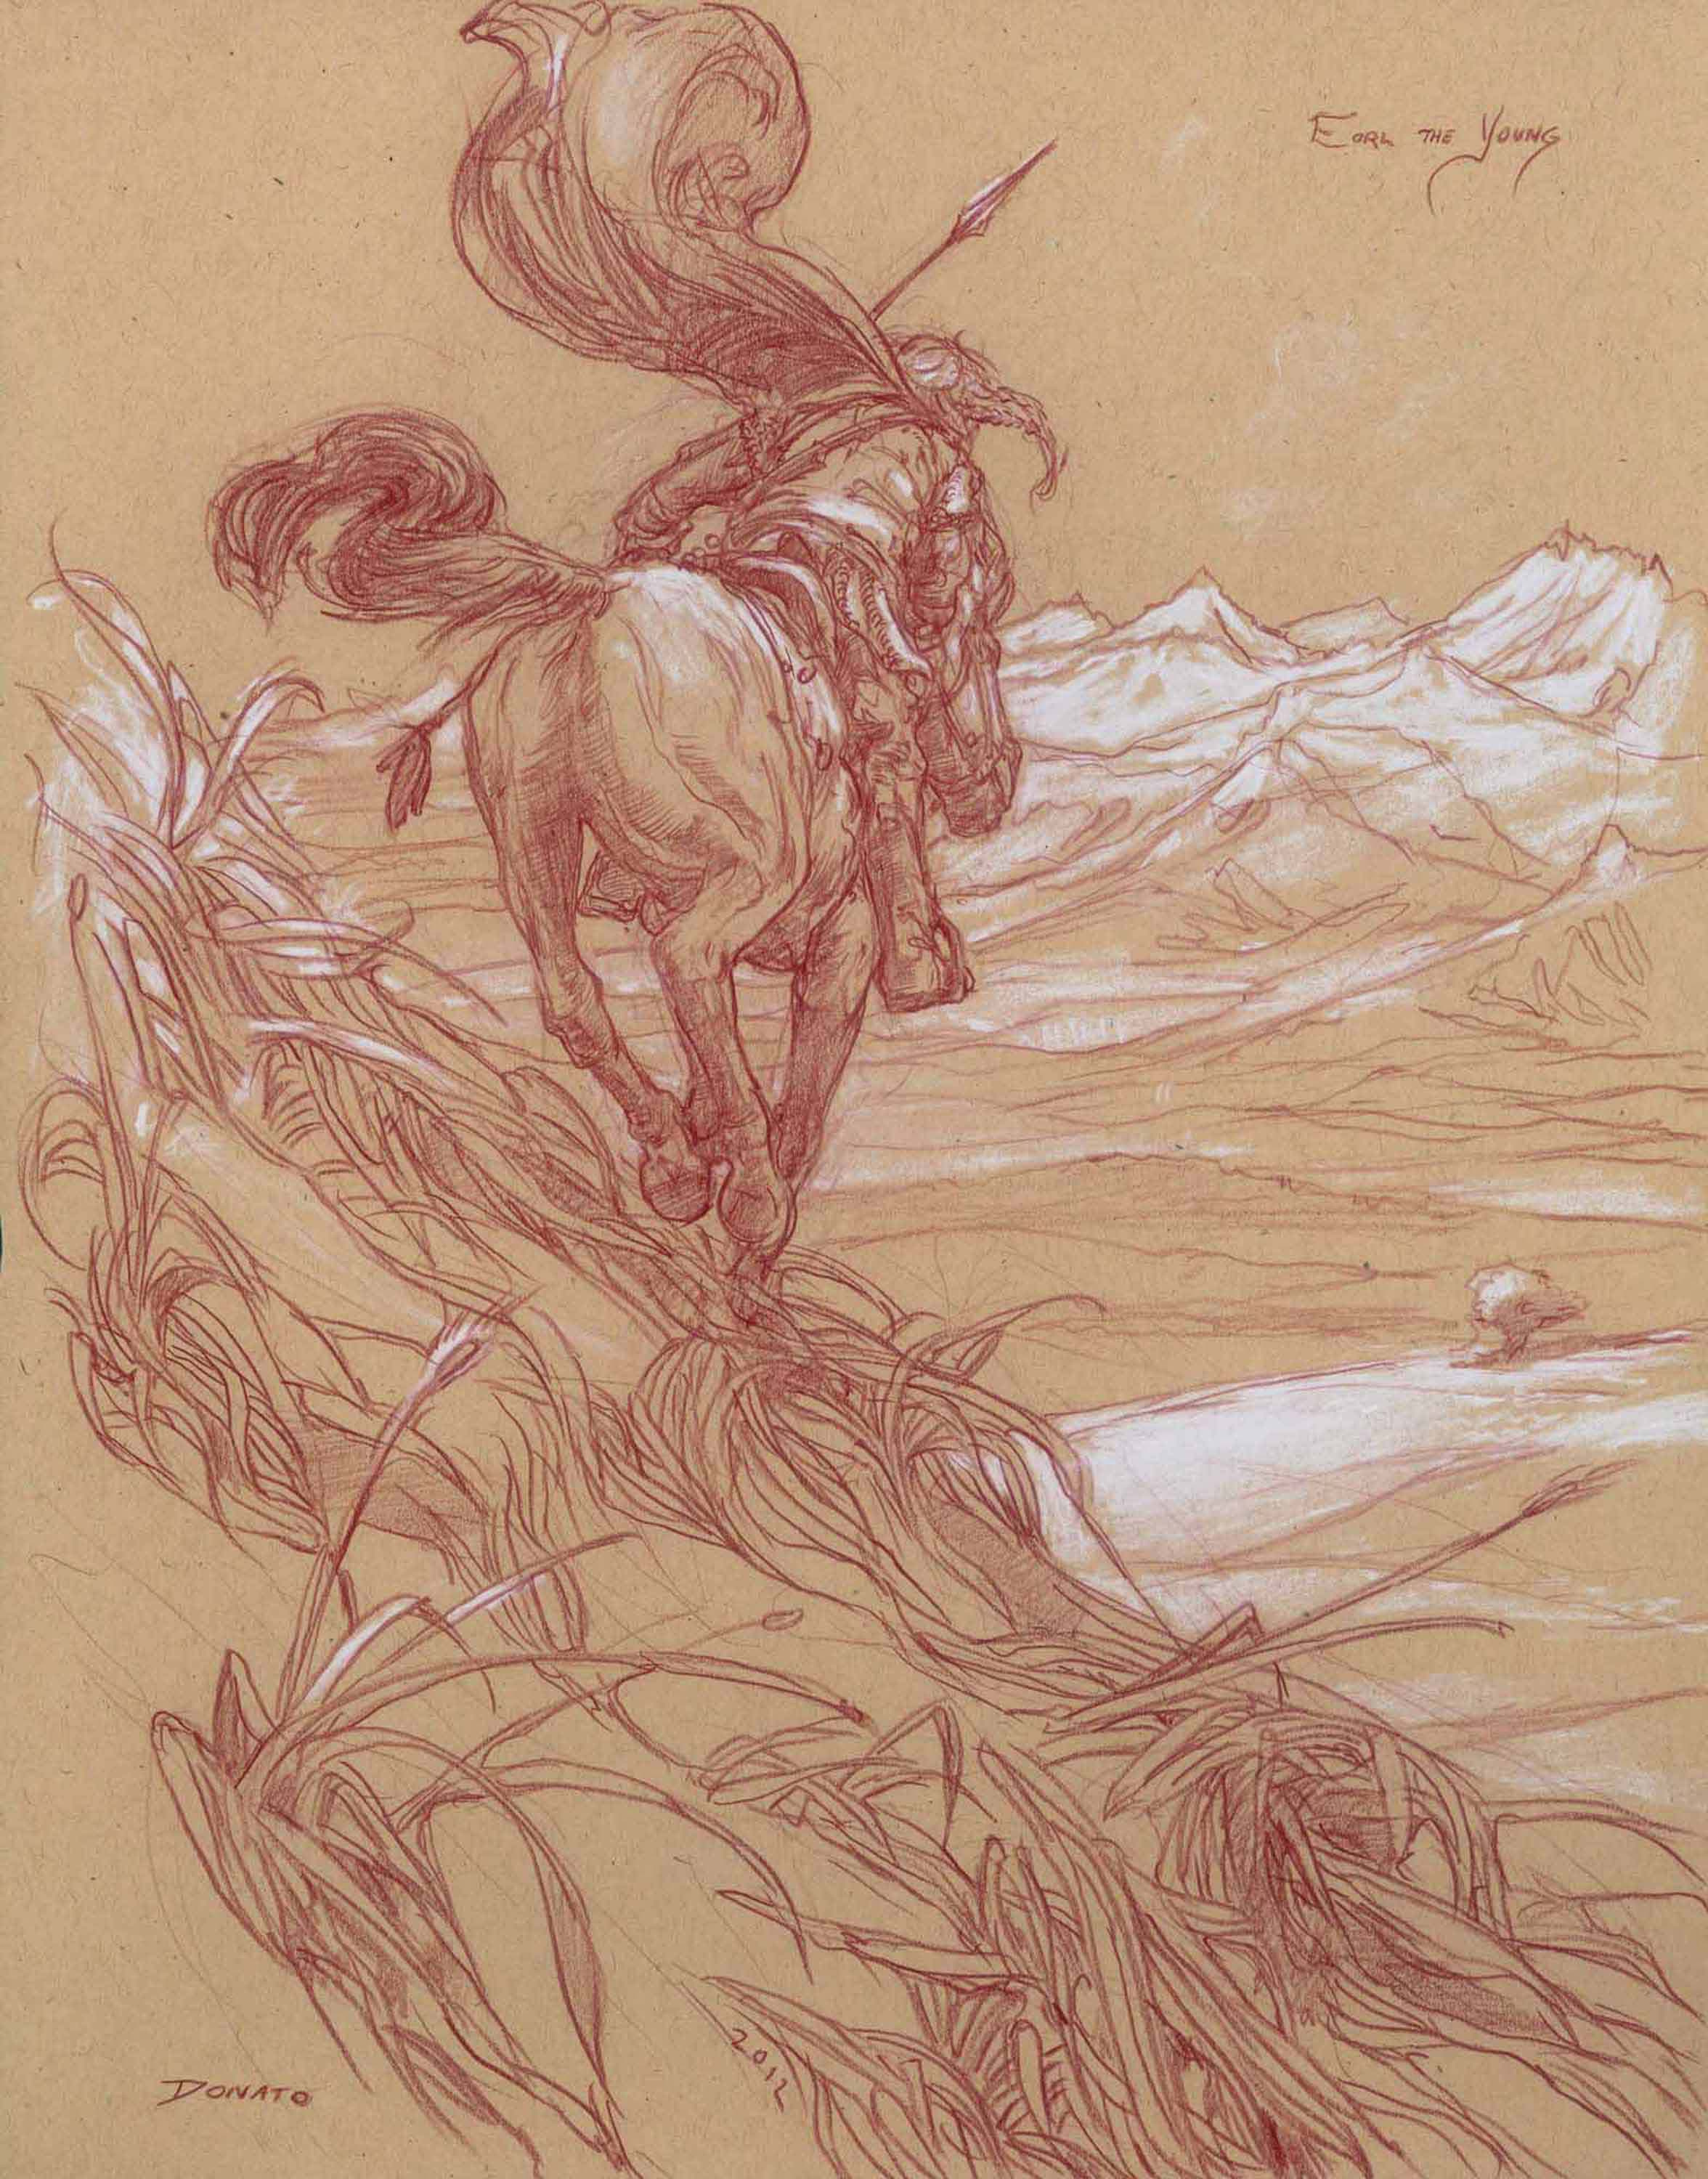 Eorl the Young
14" x11"  Watercolor Pencil and Chalk on Toned paper 2012
private collection